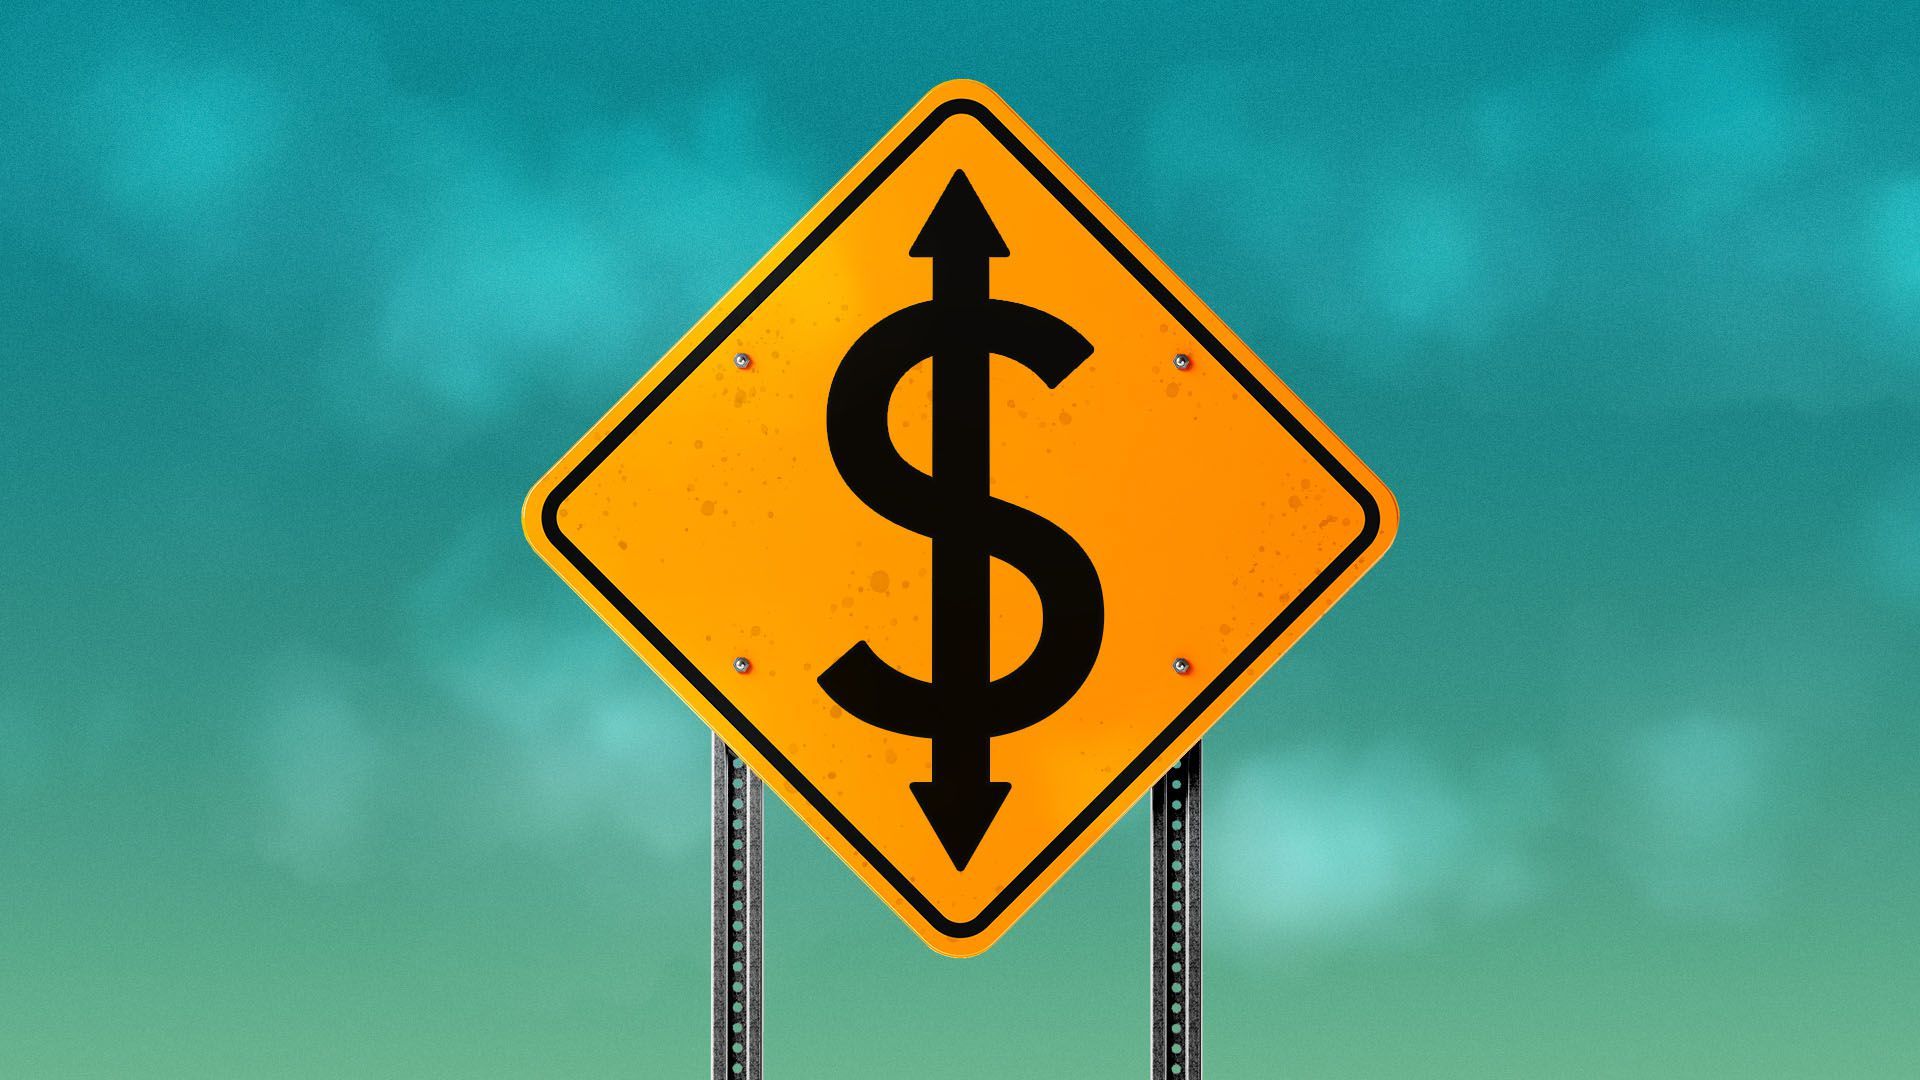 Illustration of a street sign with a dollar symbol with two arrows on it